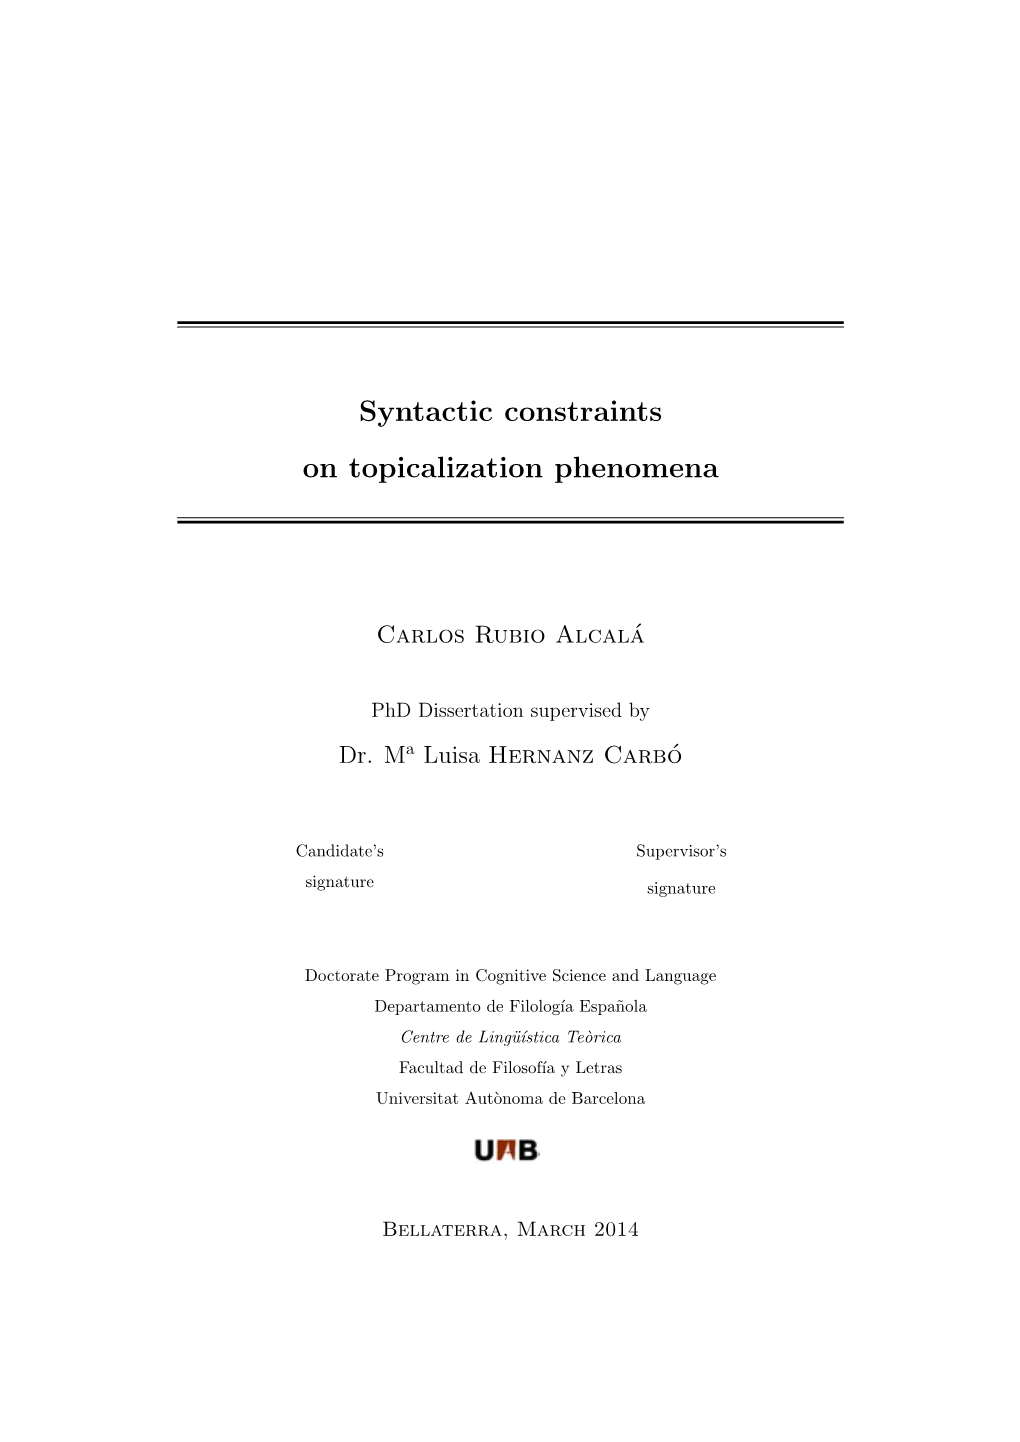 Syntactic Constraints on Topicalization Phenomena